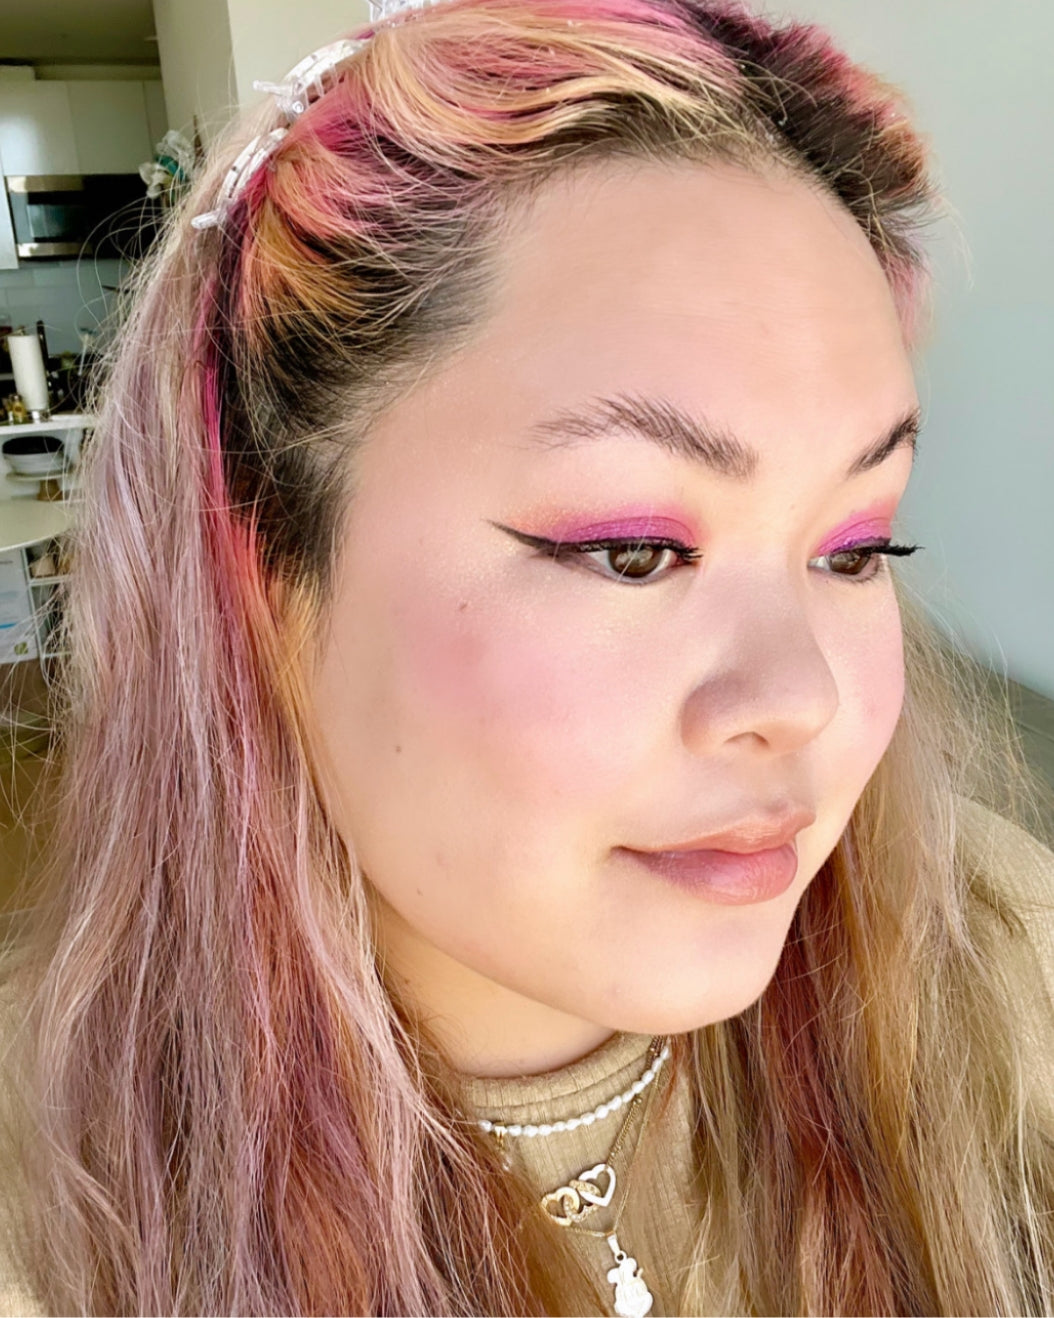 Danielle wears Milk Makeup Color Chalk for a hot pink eye look